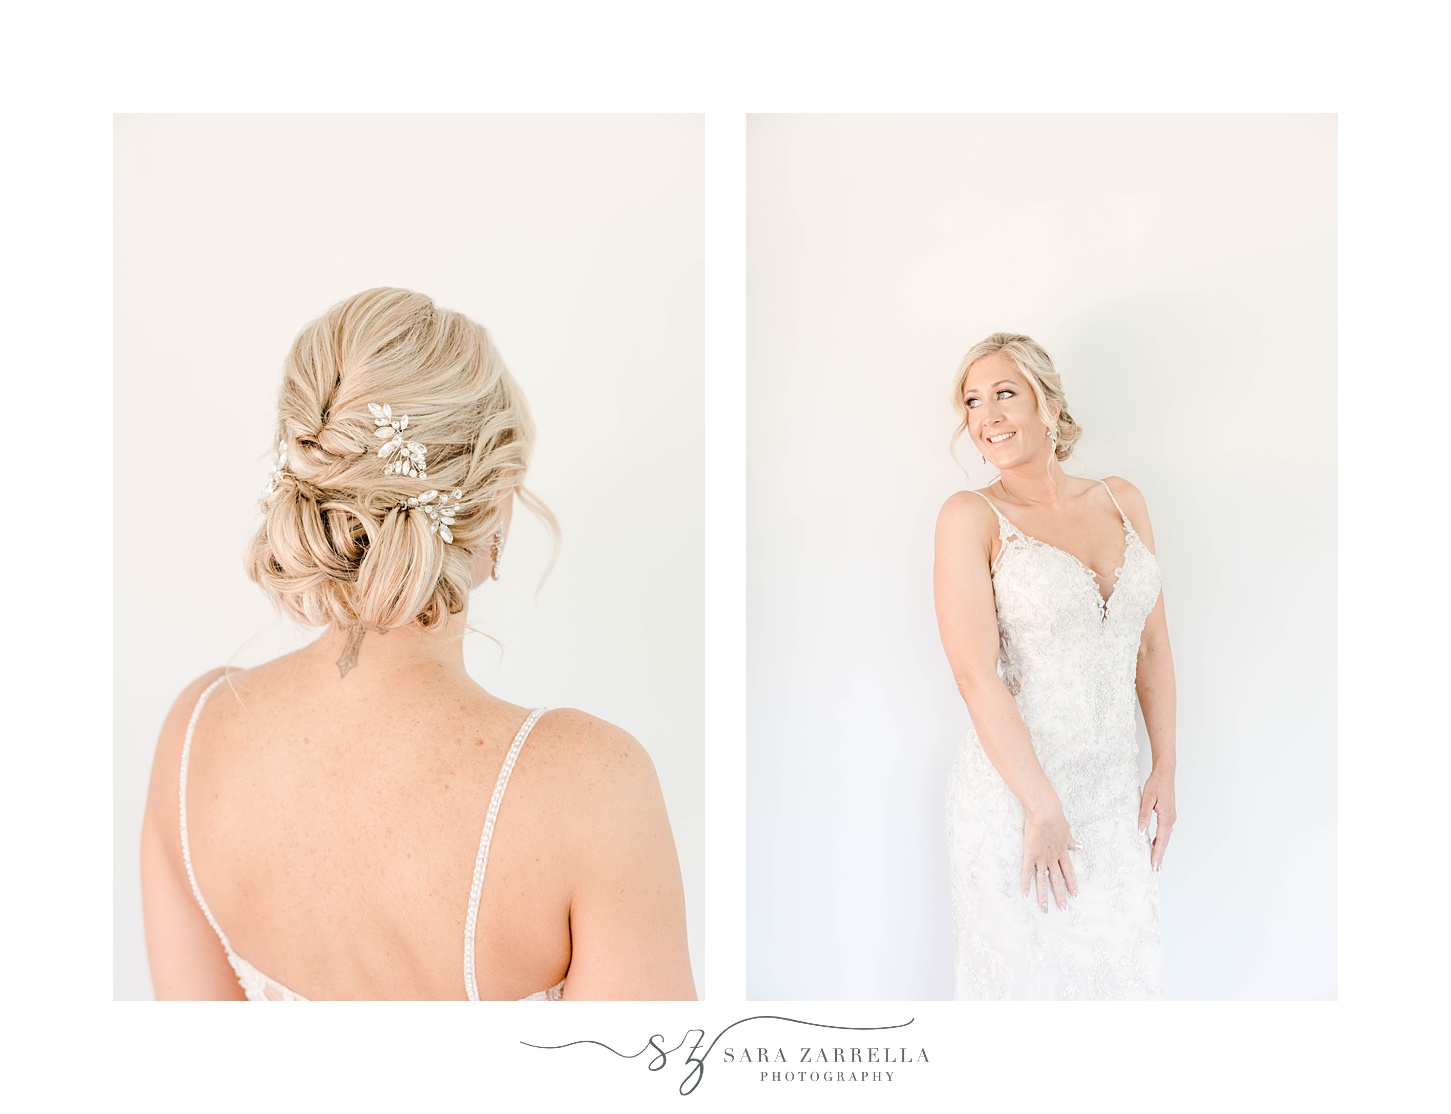 bride poses against white wall showing off wedding gown and updo